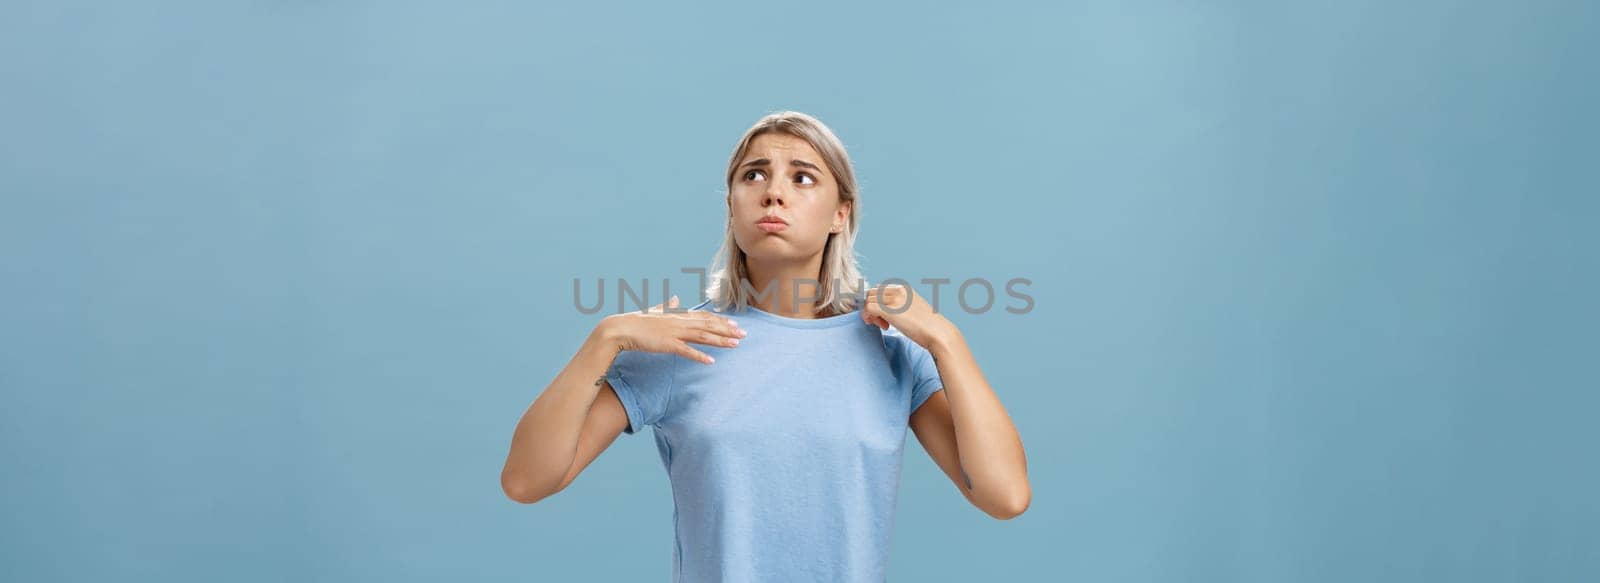 Girl feeling discomfort from heat standing over blue background in fug breathing out and frowning looking up at sun suffering from hot weather waving with t-shirt to cool. Body language concept